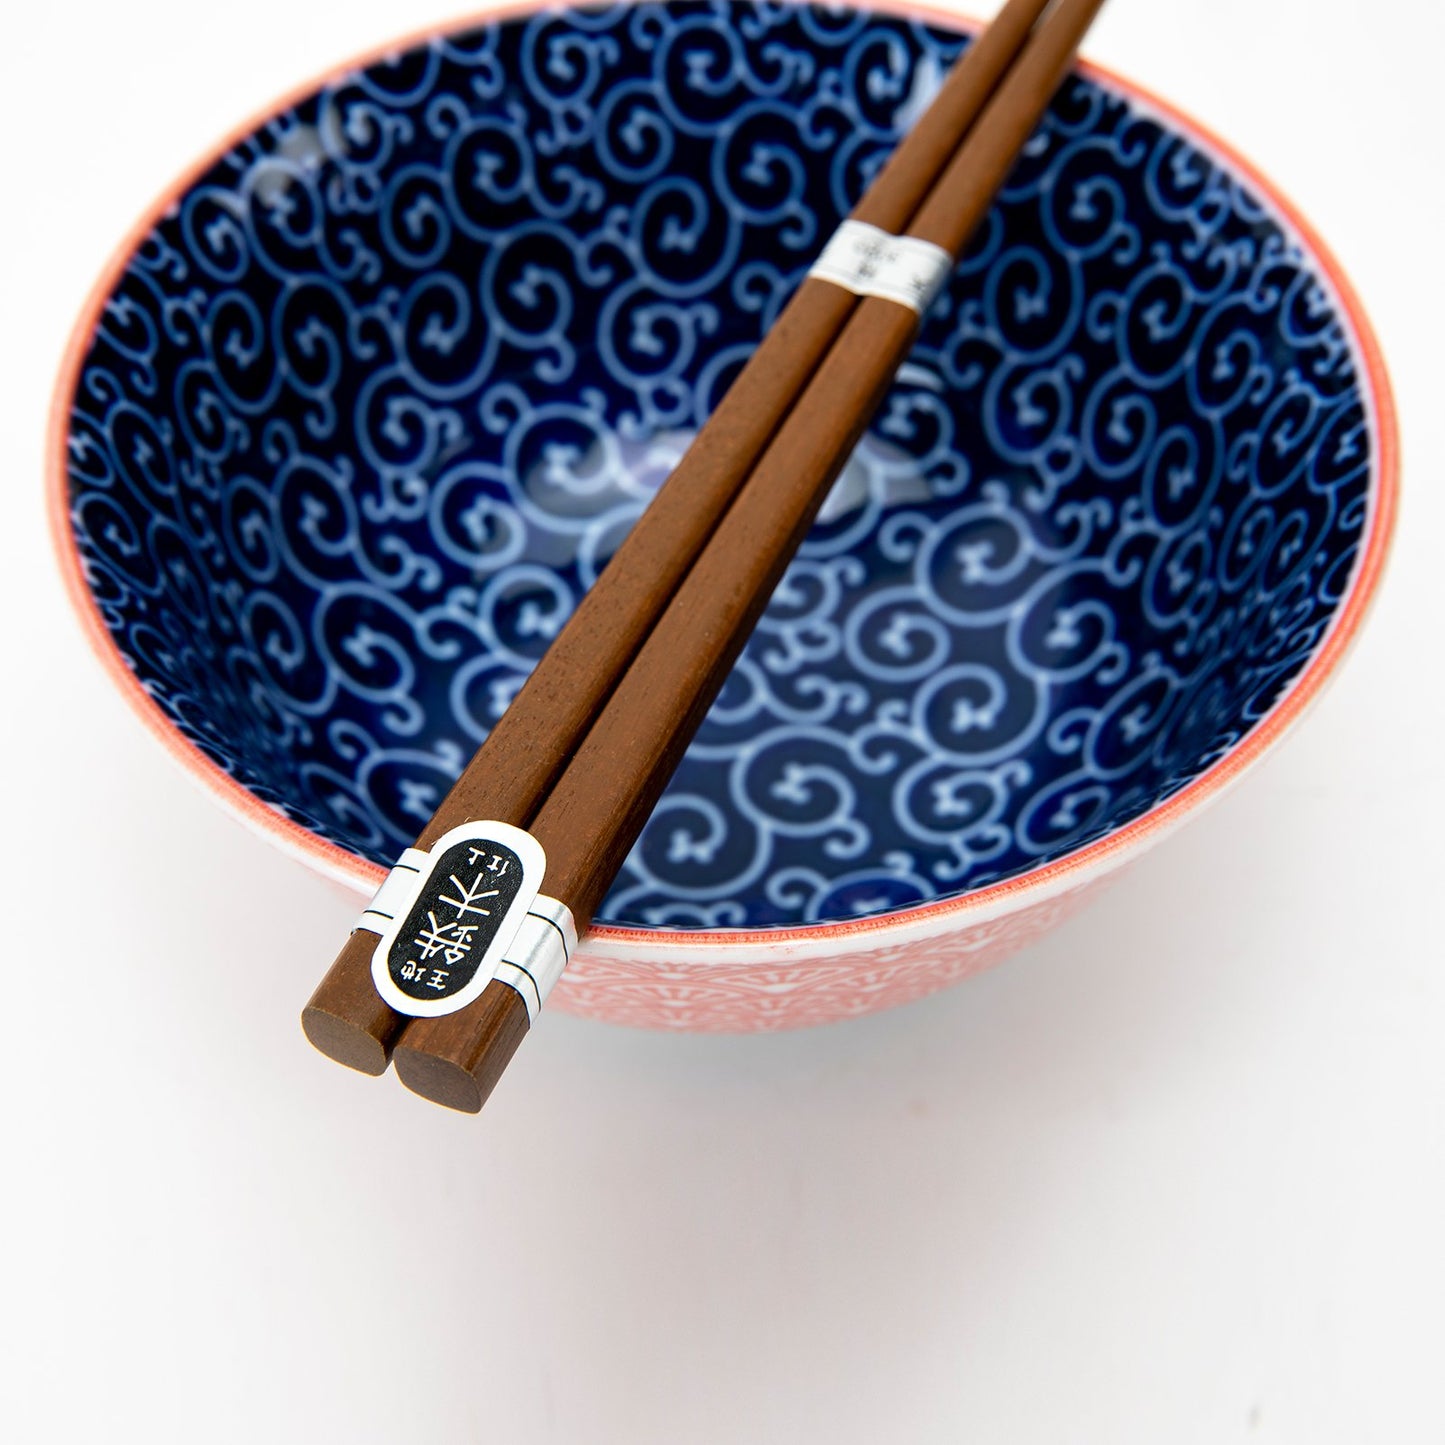 Coral and Blue Wave Bowls, Set of 2_Lifestyle_Dining_Japanese Home_Traditional